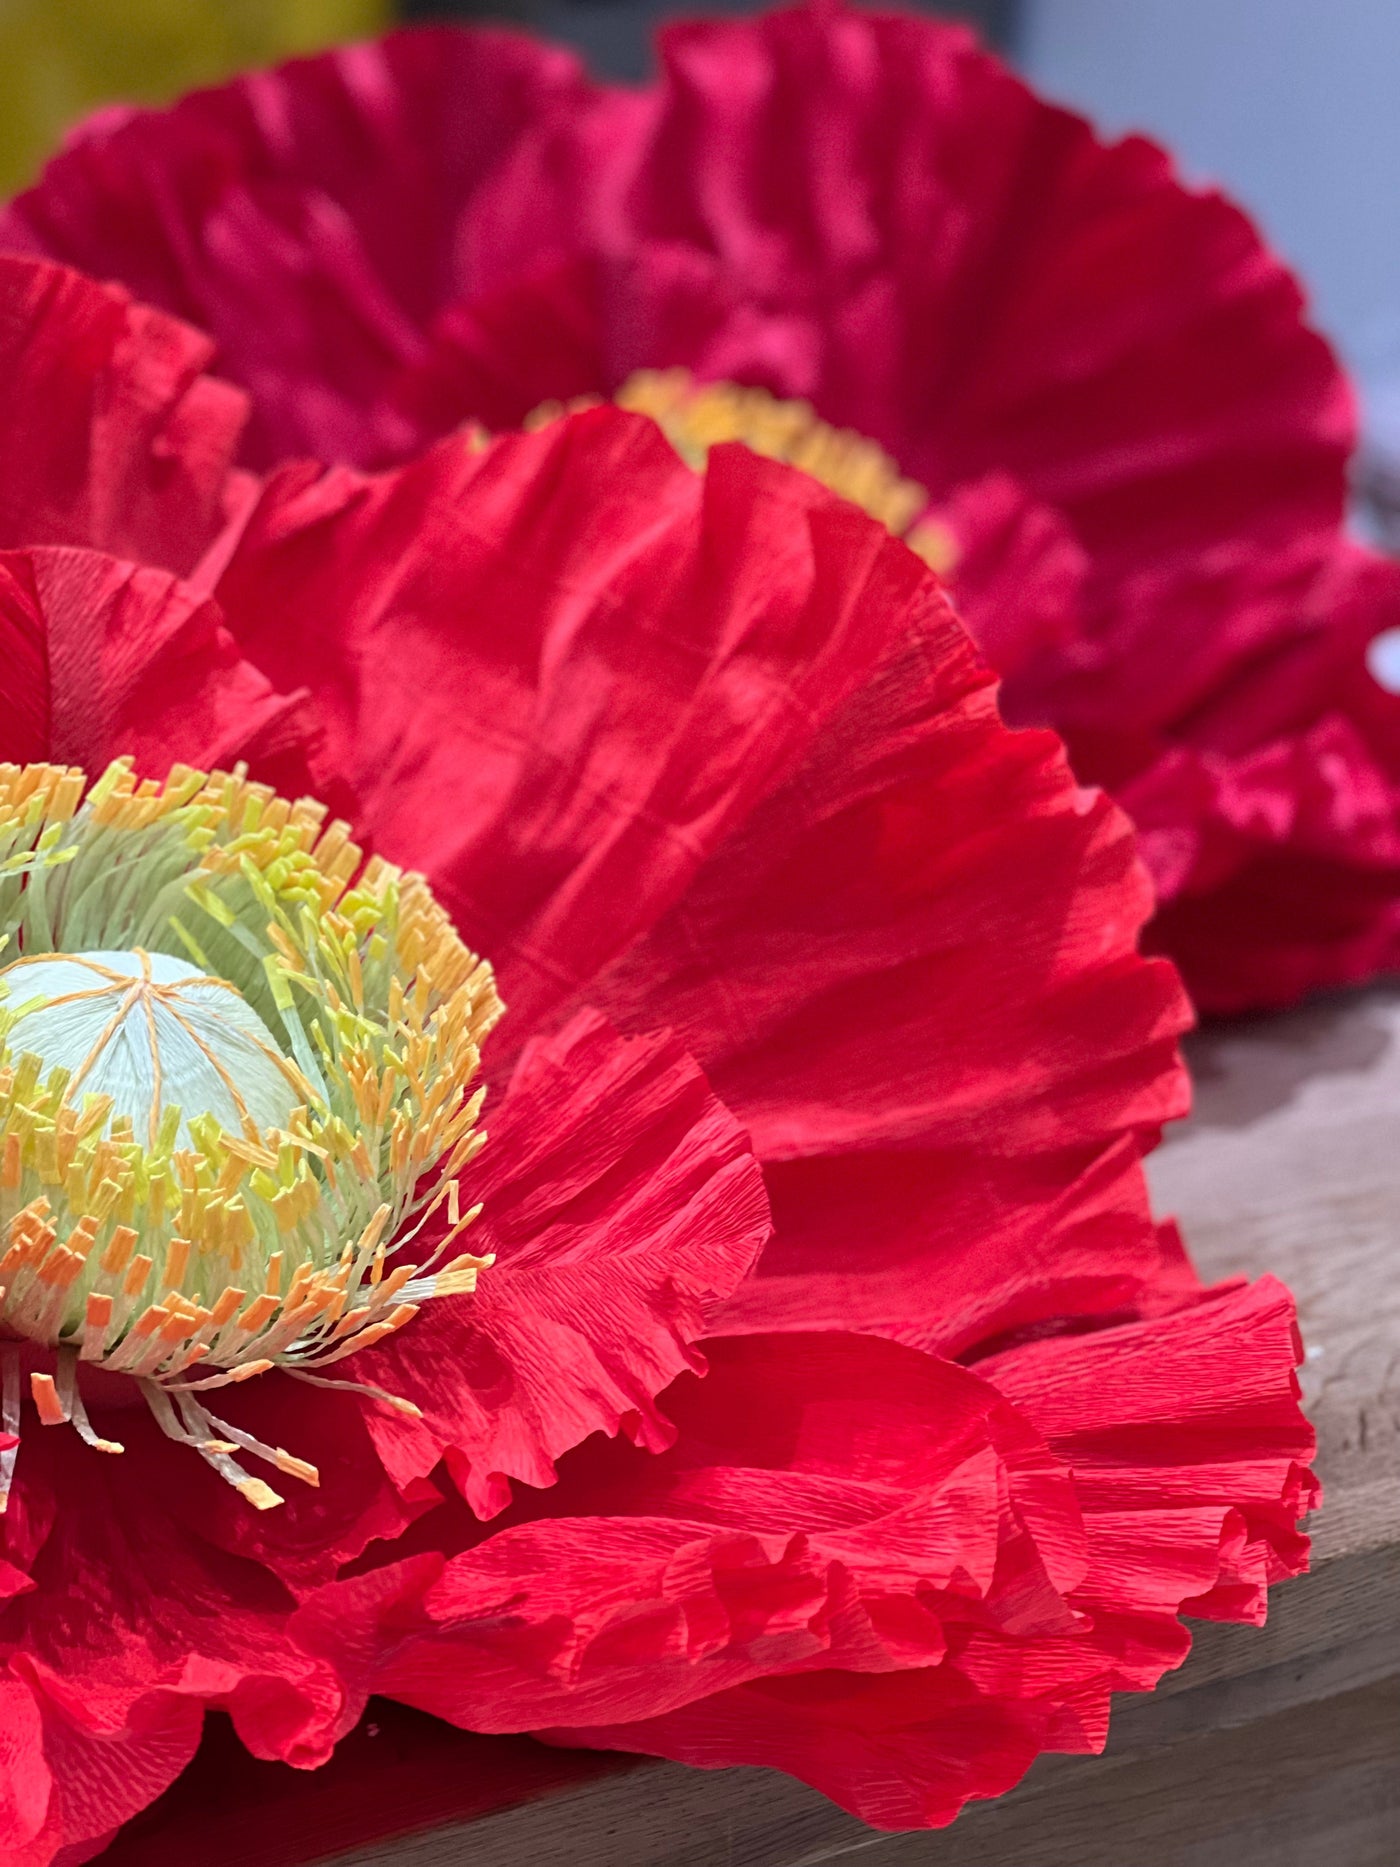  Vibrant, giant free-standing paper poppies in red, orange, and yellow hues. The intricate details of the paper petals and black centers create a striking visual display.